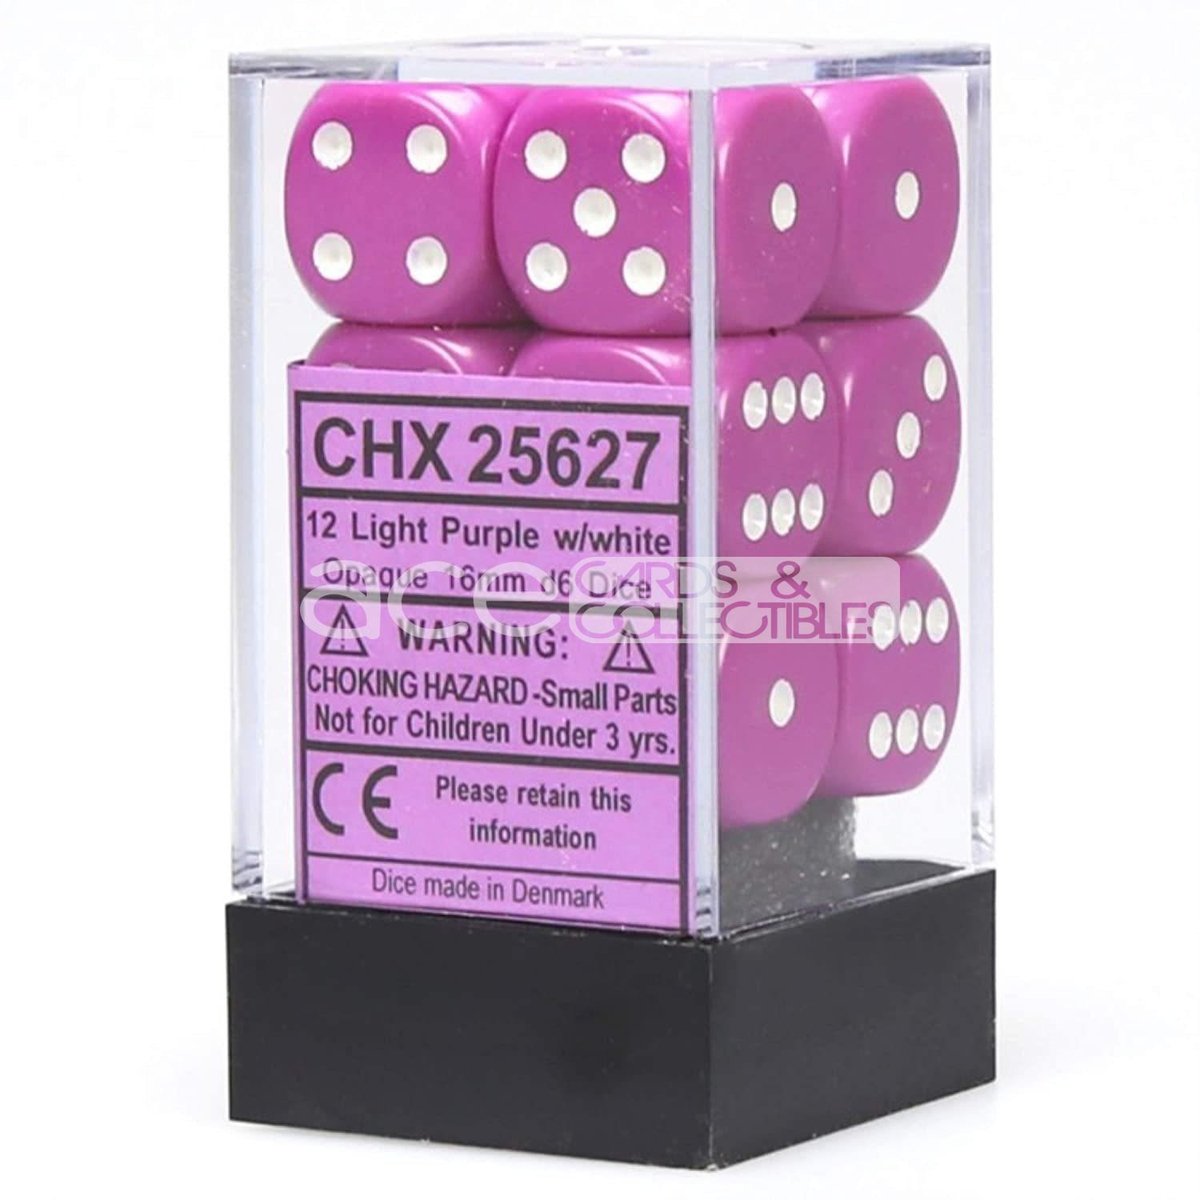 Chessex Opaque 16mm d6 12pcs Dice (Light Purple/White) [CHX25627]-Chessex-Ace Cards & Collectibles